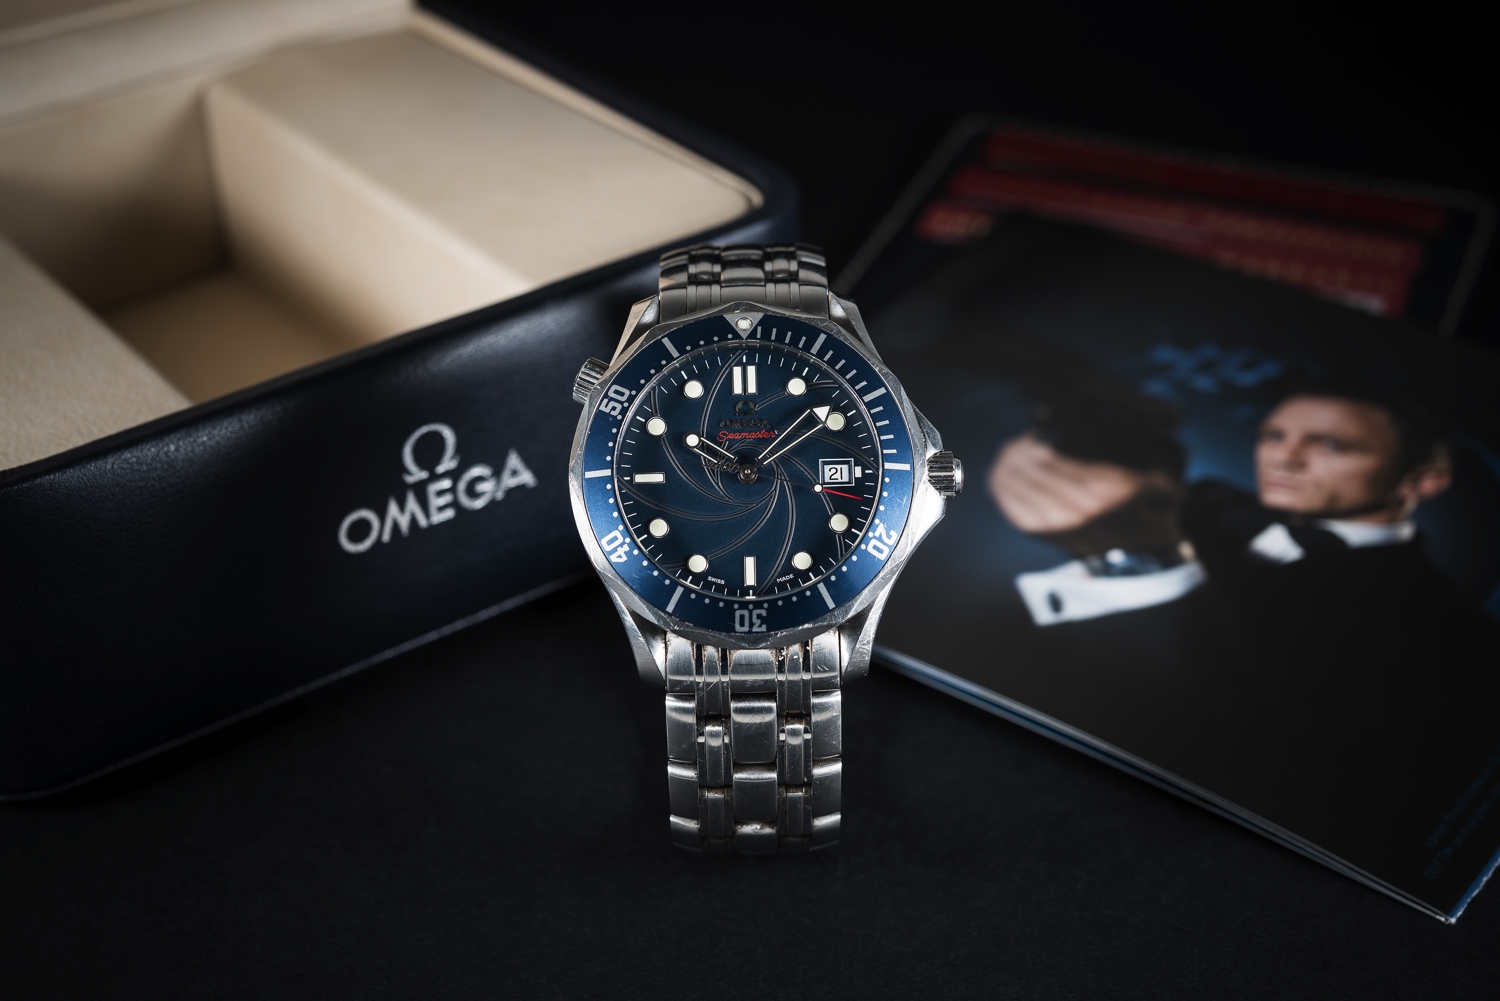 A GENTLEMAN'S STAINLESS STEEL OMEGA SEAMASTER PROFESSIONAL 300M BRACELET WATCH DATED 2006, JAMES - Image 2 of 2